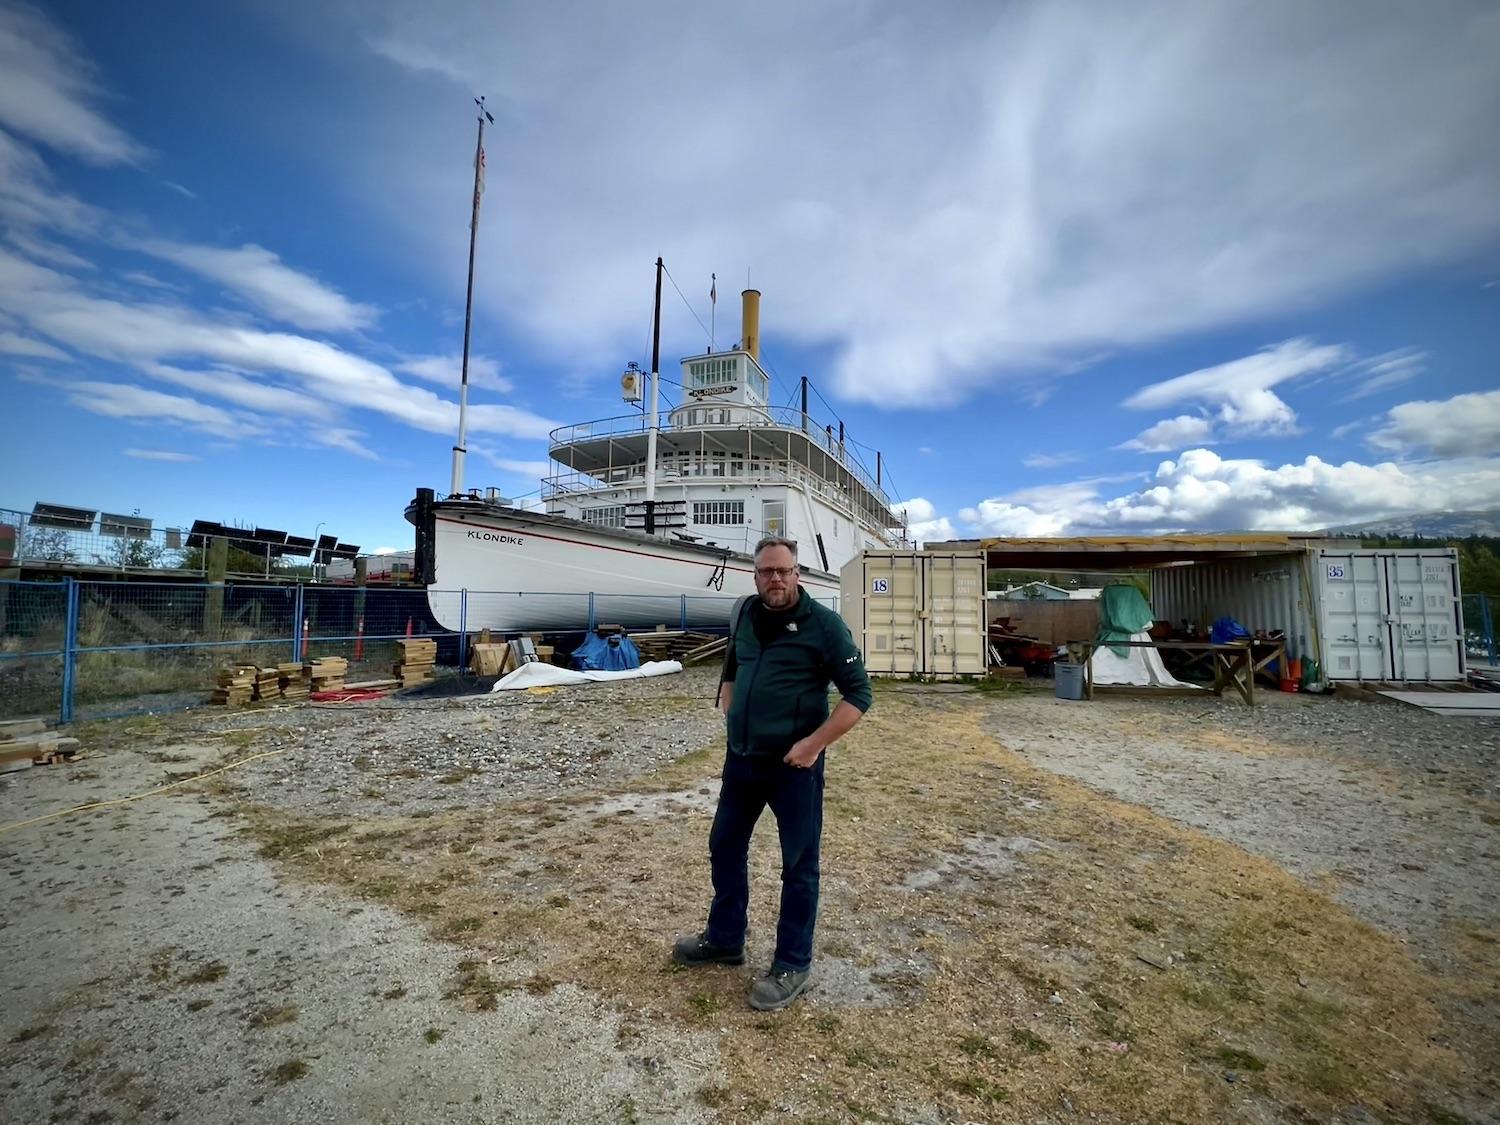 Between the S.S. Klondike and the Atlin Barge, shipwright Terry Karlsen has his work area where every scrap of lumber is put to good use.